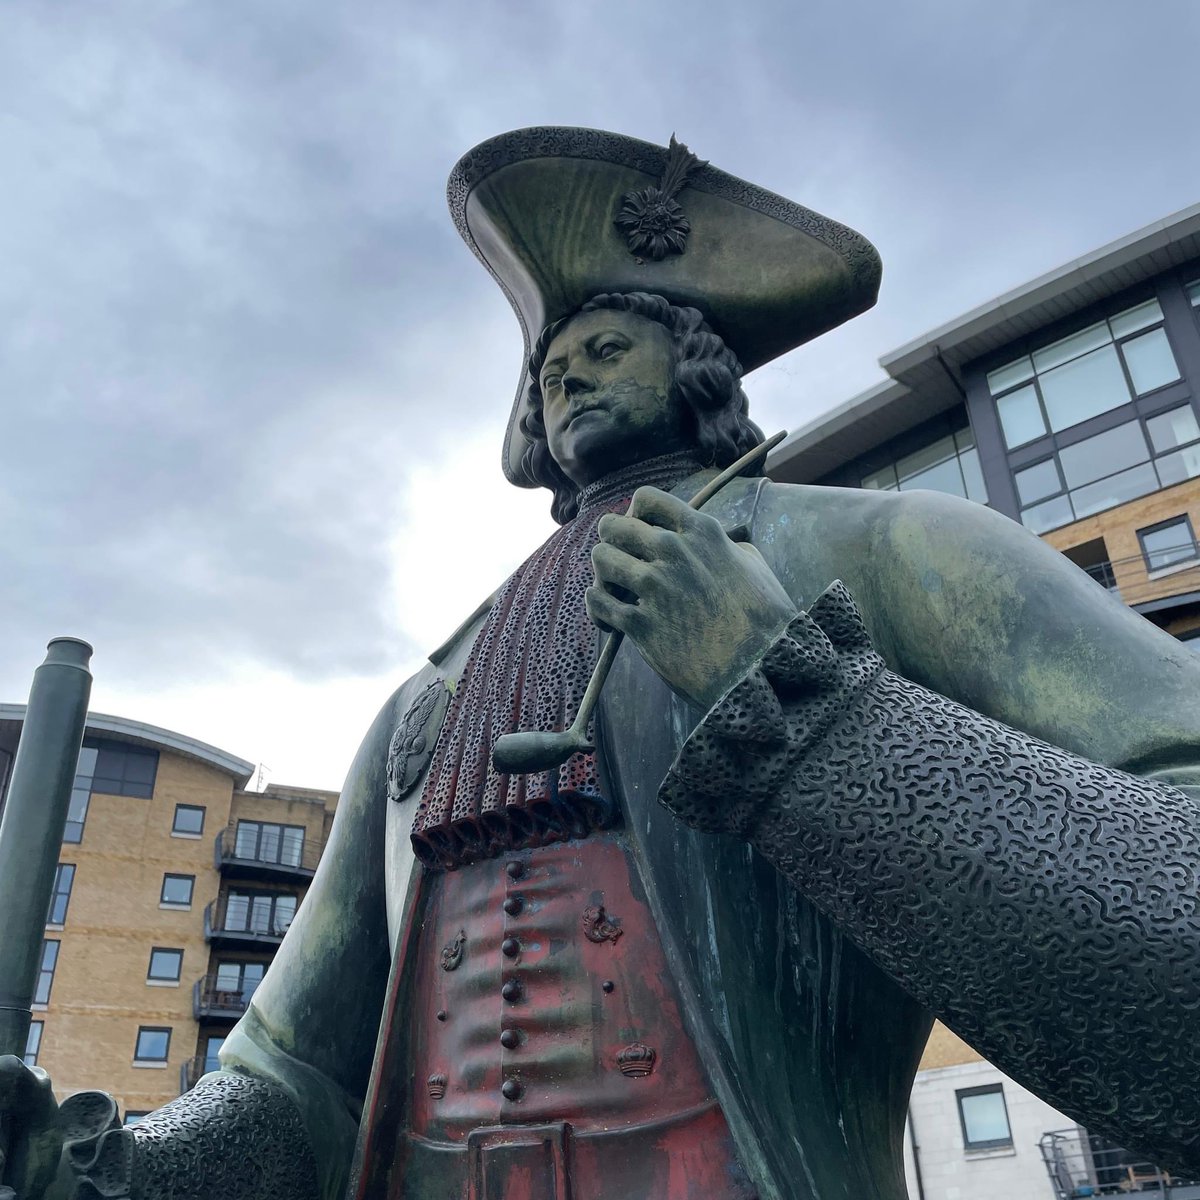 Did you know Peter the Great came to London to learn about shipbuilding in 1698? He stayed in Deptford for for four months and spent much of his time at Deptford Docks. This statue of Peter the Great is beside the river near Deptford, just look at that clay pipe!

 #Mudlarking